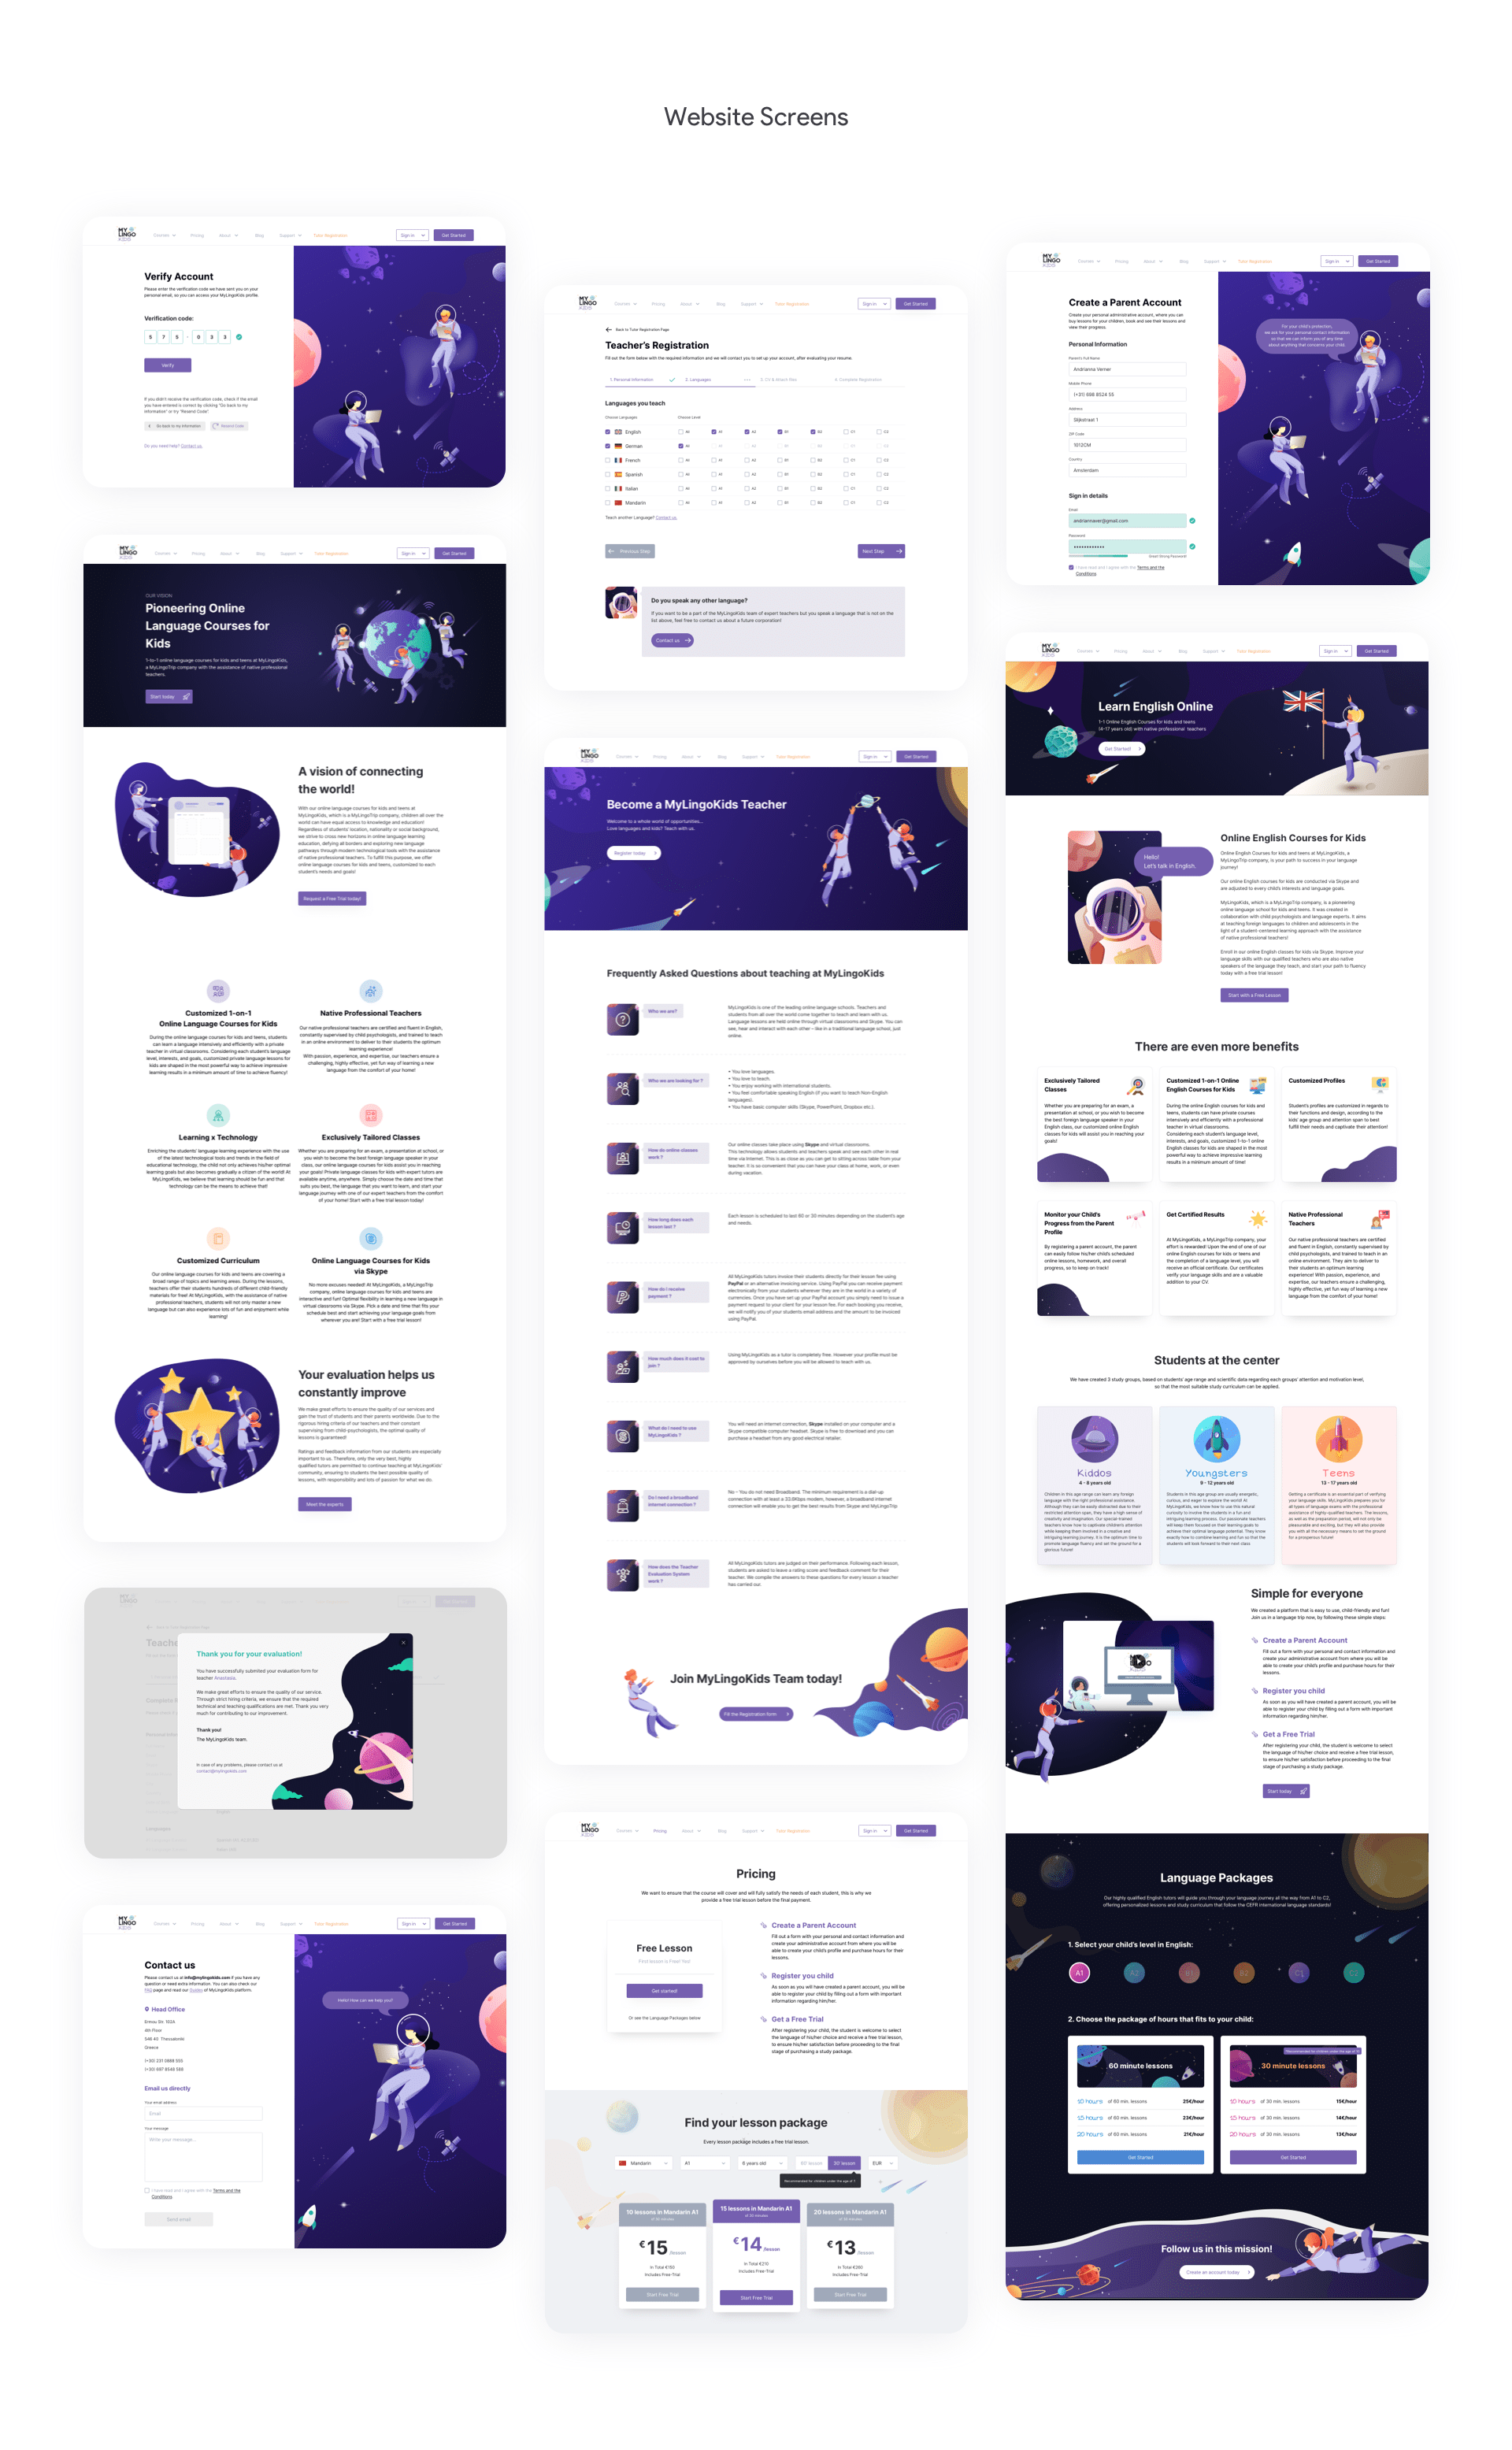 Set of web pages design with illustrations in a space theme
